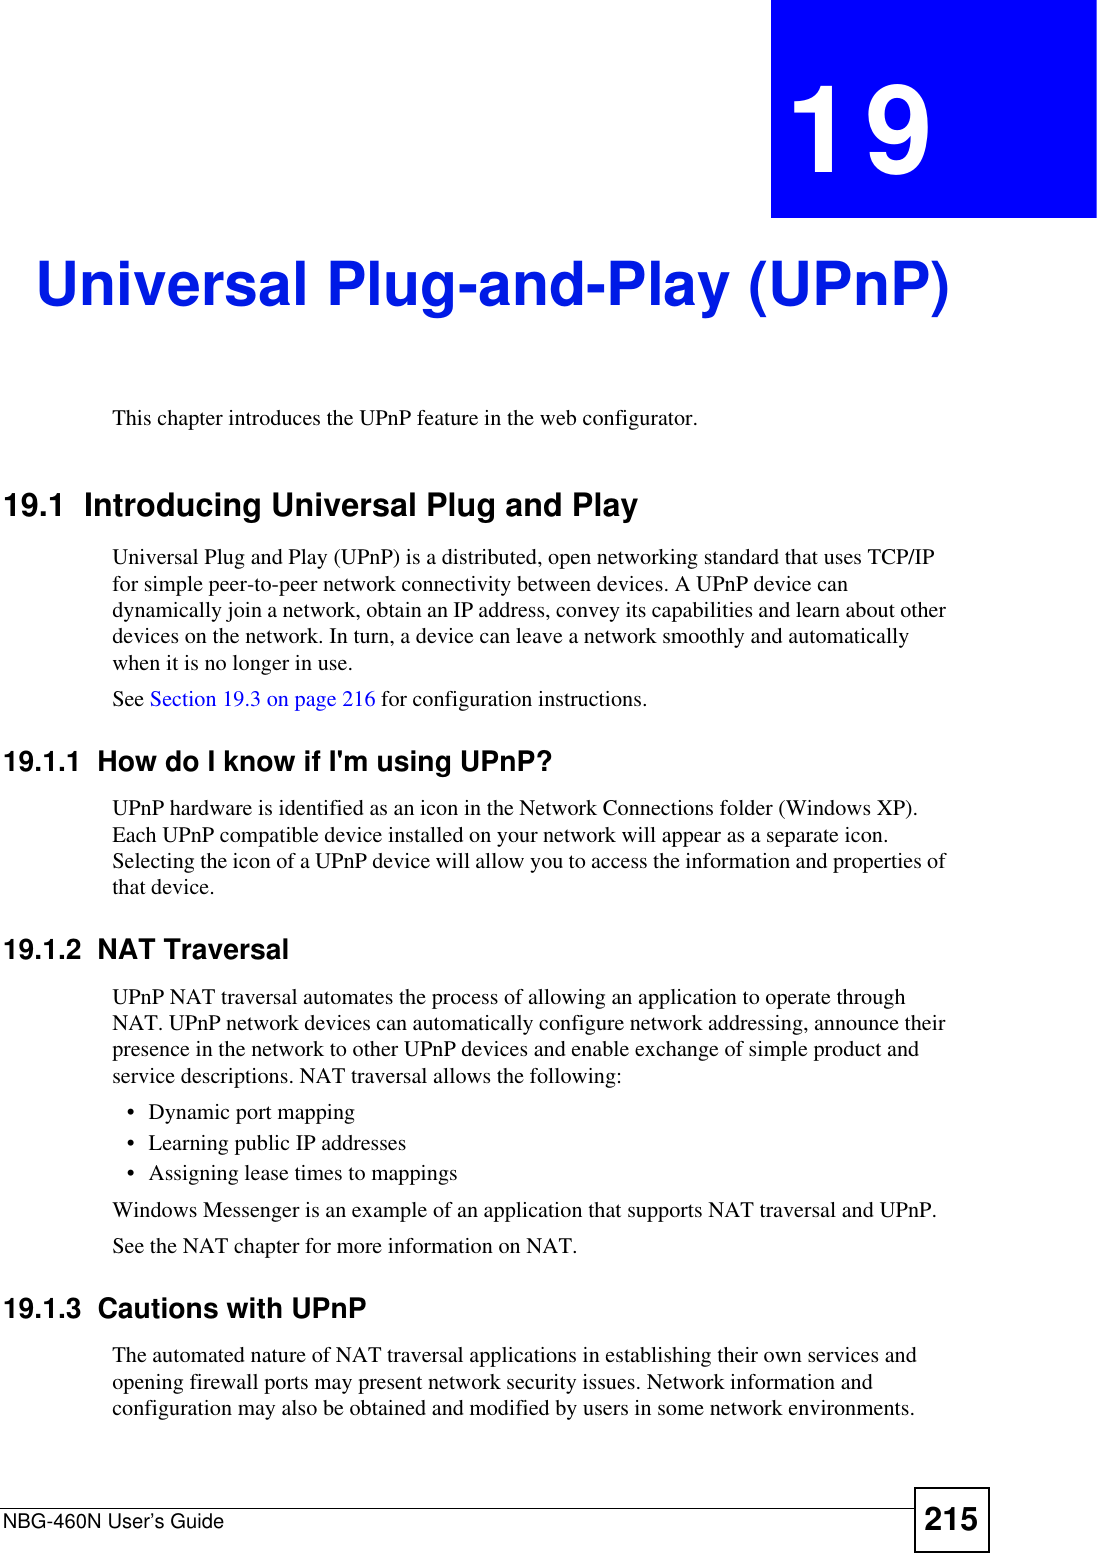 NBG-460N User’s Guide 215CHAPTER 19Universal Plug-and-Play (UPnP)This chapter introduces the UPnP feature in the web configurator.19.1  Introducing Universal Plug and Play Universal Plug and Play (UPnP) is a distributed, open networking standard that uses TCP/IP for simple peer-to-peer network connectivity between devices. A UPnP device can dynamically join a network, obtain an IP address, convey its capabilities and learn about other devices on the network. In turn, a device can leave a network smoothly and automatically when it is no longer in use.See Section 19.3 on page 216 for configuration instructions. 19.1.1  How do I know if I&apos;m using UPnP? UPnP hardware is identified as an icon in the Network Connections folder (Windows XP). Each UPnP compatible device installed on your network will appear as a separate icon. Selecting the icon of a UPnP device will allow you to access the information and properties of that device. 19.1.2  NAT TraversalUPnP NAT traversal automates the process of allowing an application to operate through NAT. UPnP network devices can automatically configure network addressing, announce their presence in the network to other UPnP devices and enable exchange of simple product and service descriptions. NAT traversal allows the following:• Dynamic port mapping• Learning public IP addresses• Assigning lease times to mappingsWindows Messenger is an example of an application that supports NAT traversal and UPnP. See the NAT chapter for more information on NAT.19.1.3  Cautions with UPnPThe automated nature of NAT traversal applications in establishing their own services and opening firewall ports may present network security issues. Network information and configuration may also be obtained and modified by users in some network environments. 